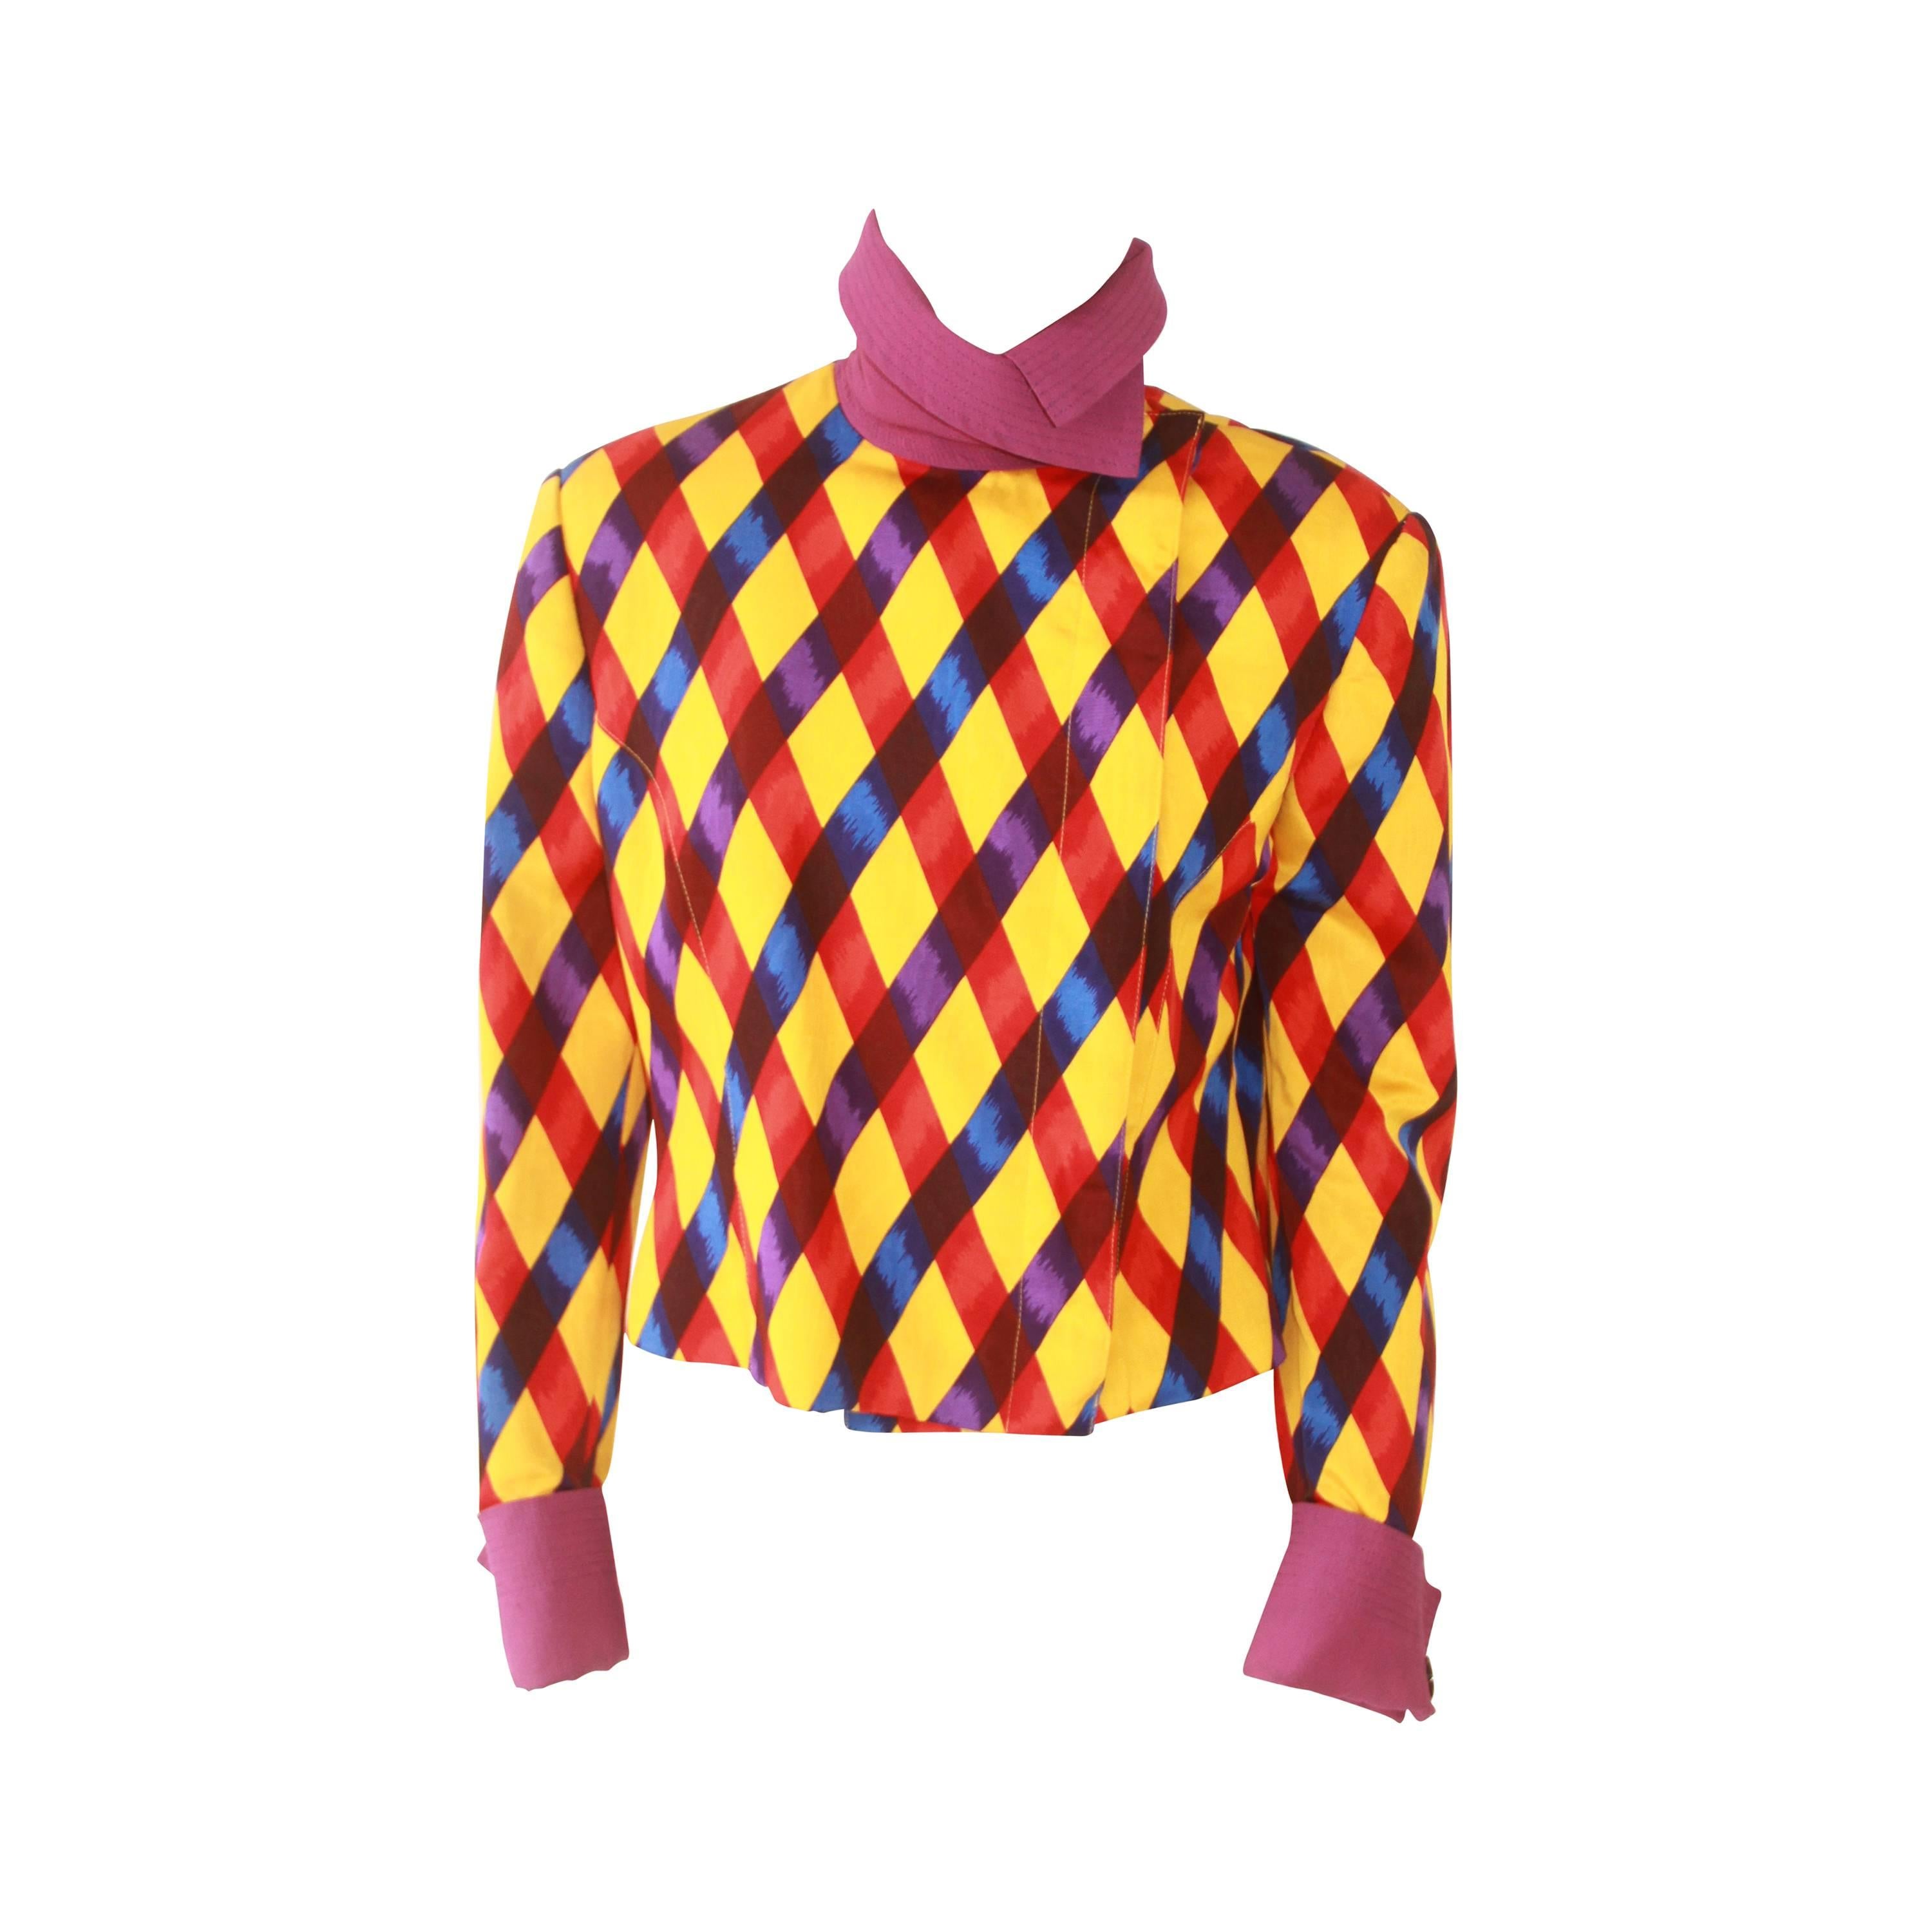 Rare Gianni Versace Harlequin Printed Jacket Spring 1990 For Sale